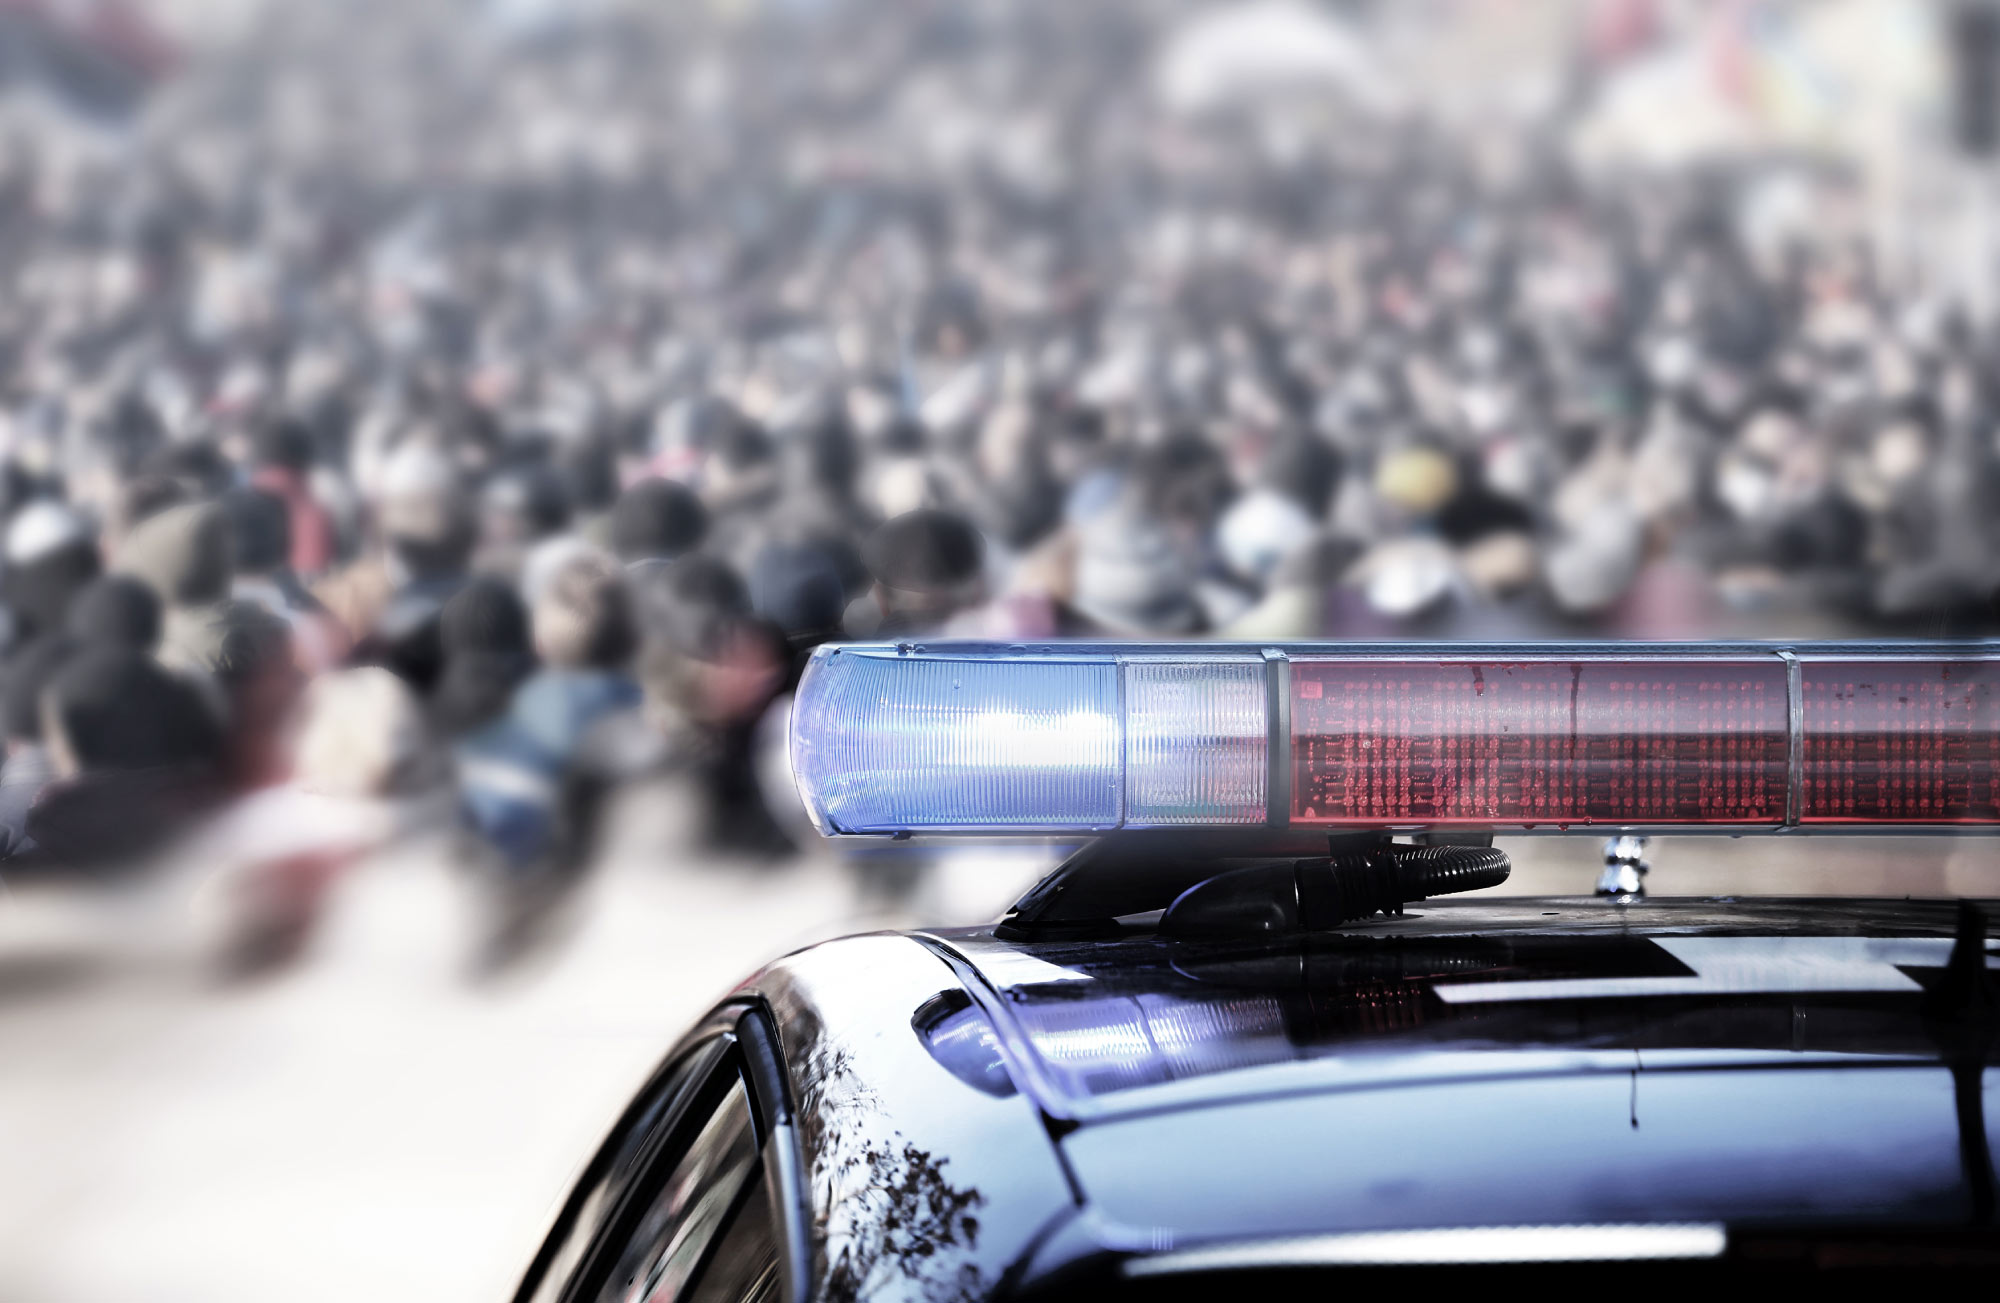 Public Safety Header Picture showing a police car and people